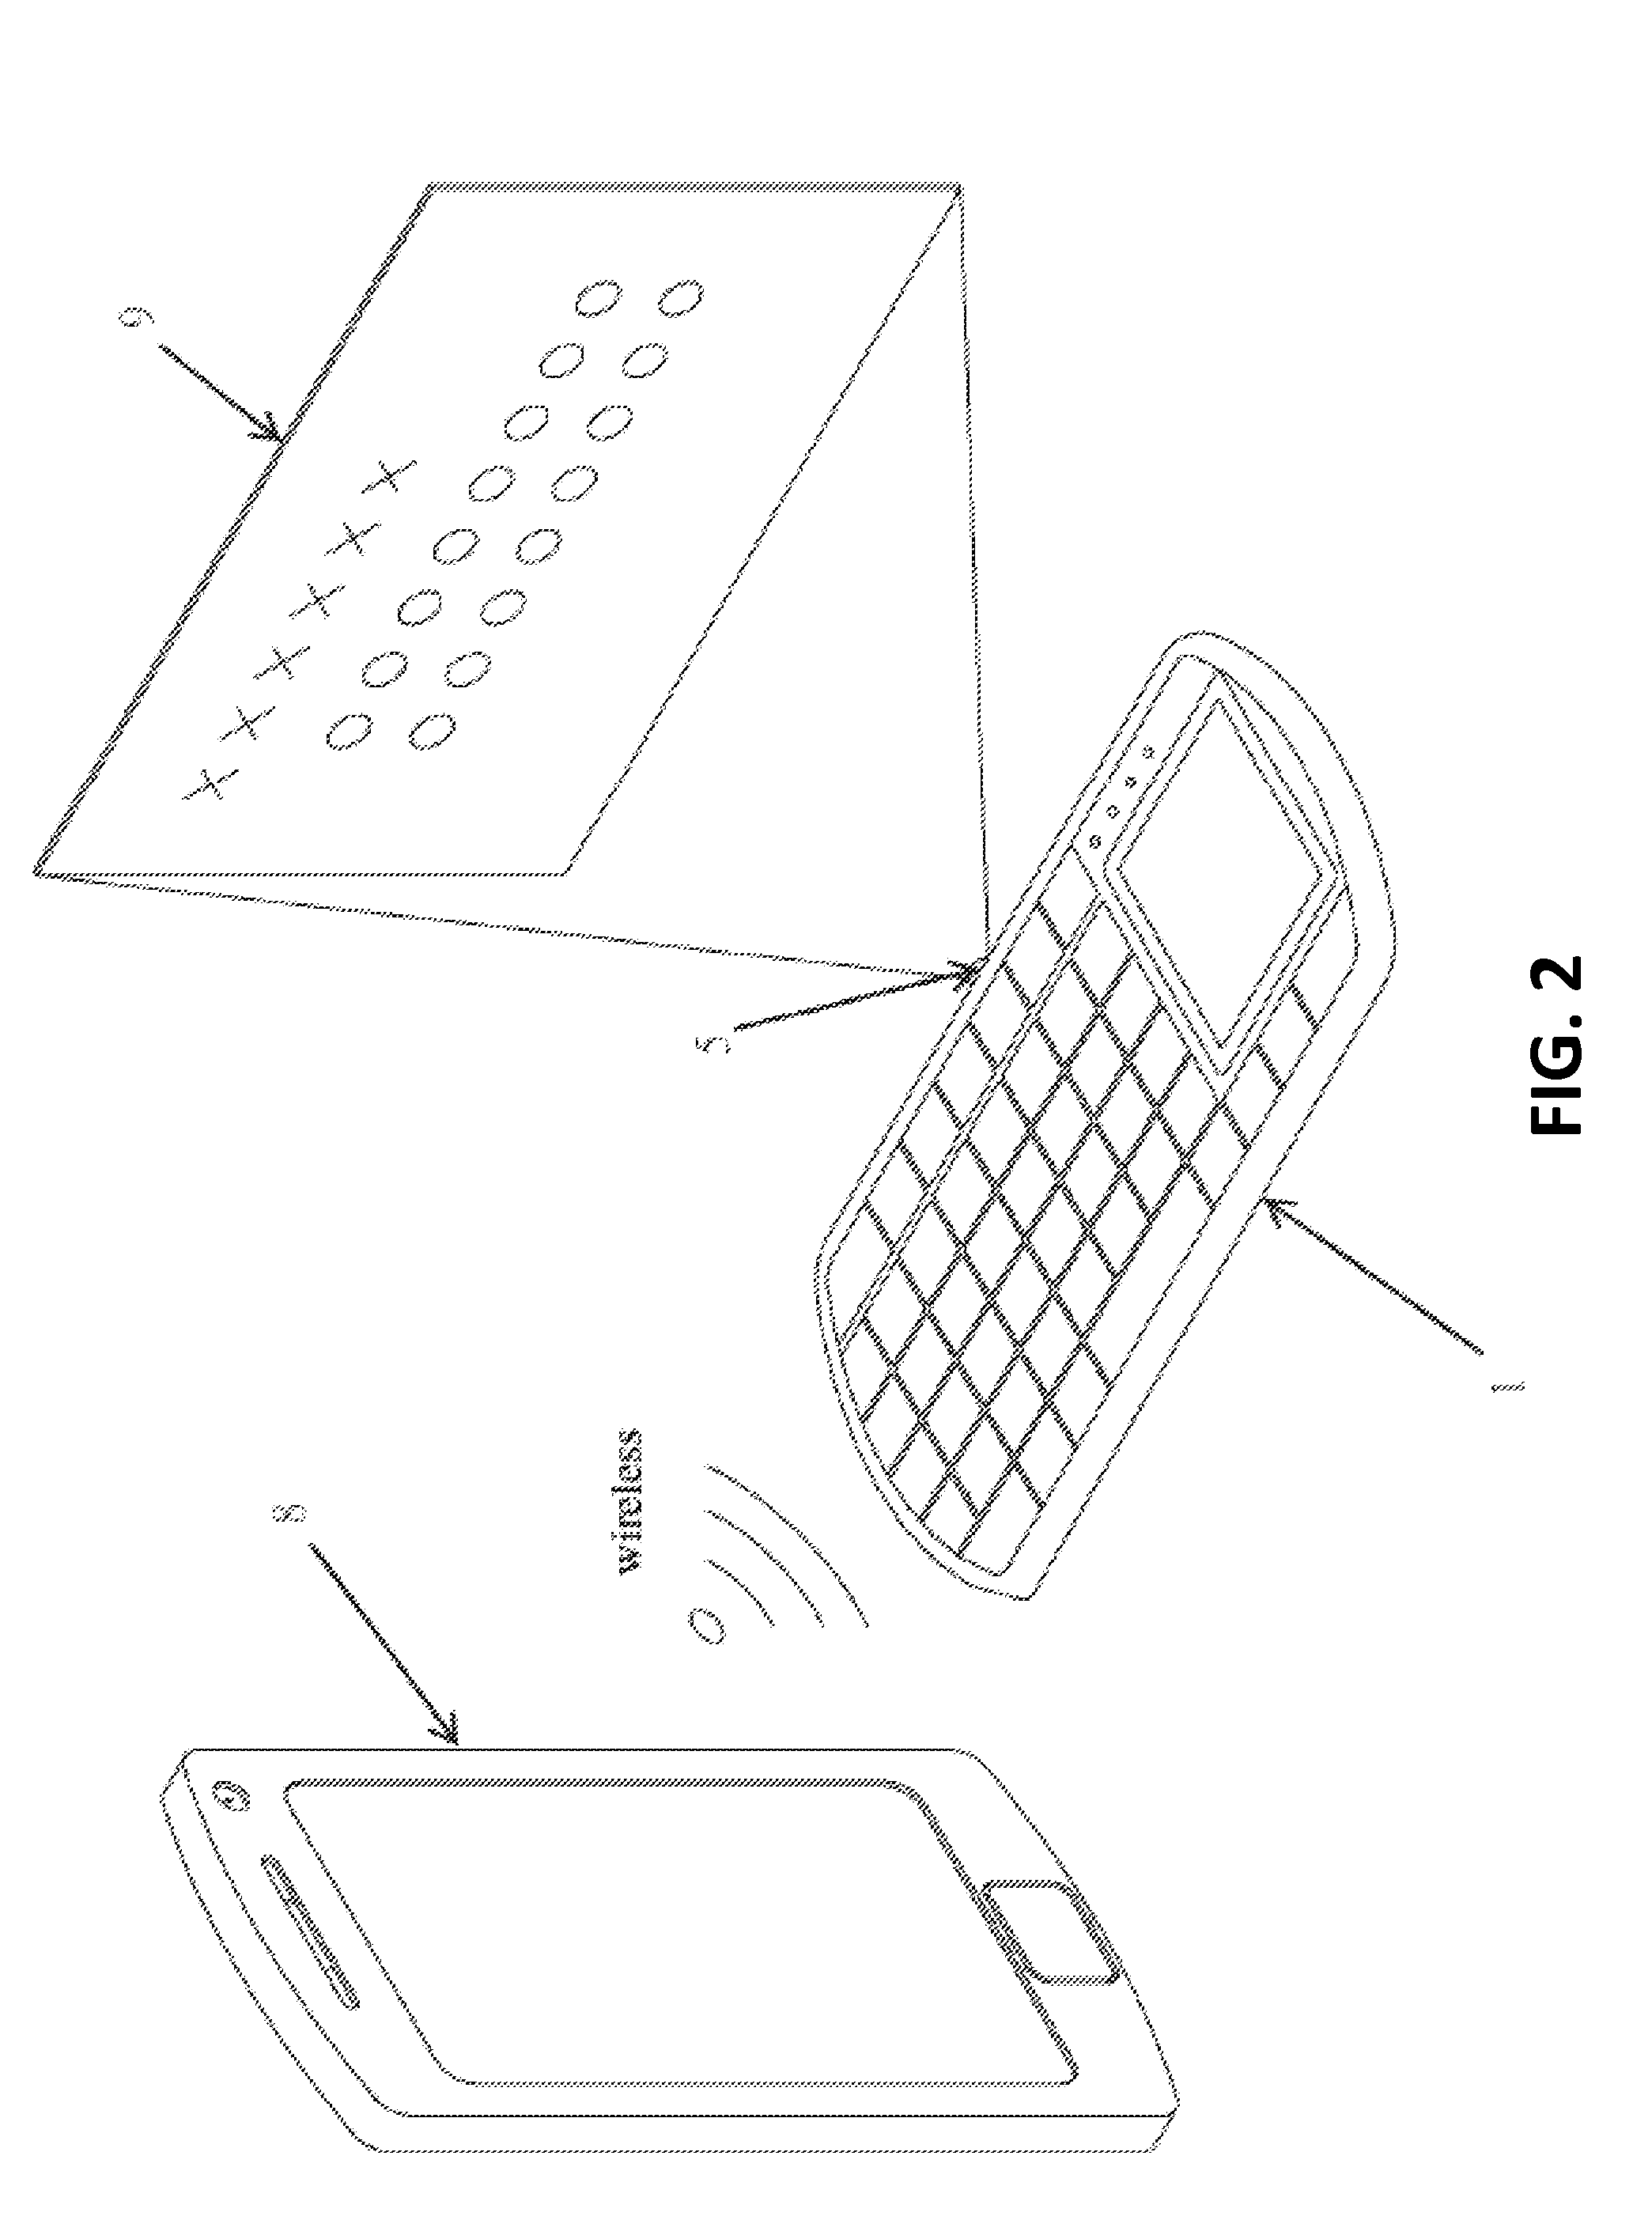 Projection keyboard for portable communication device